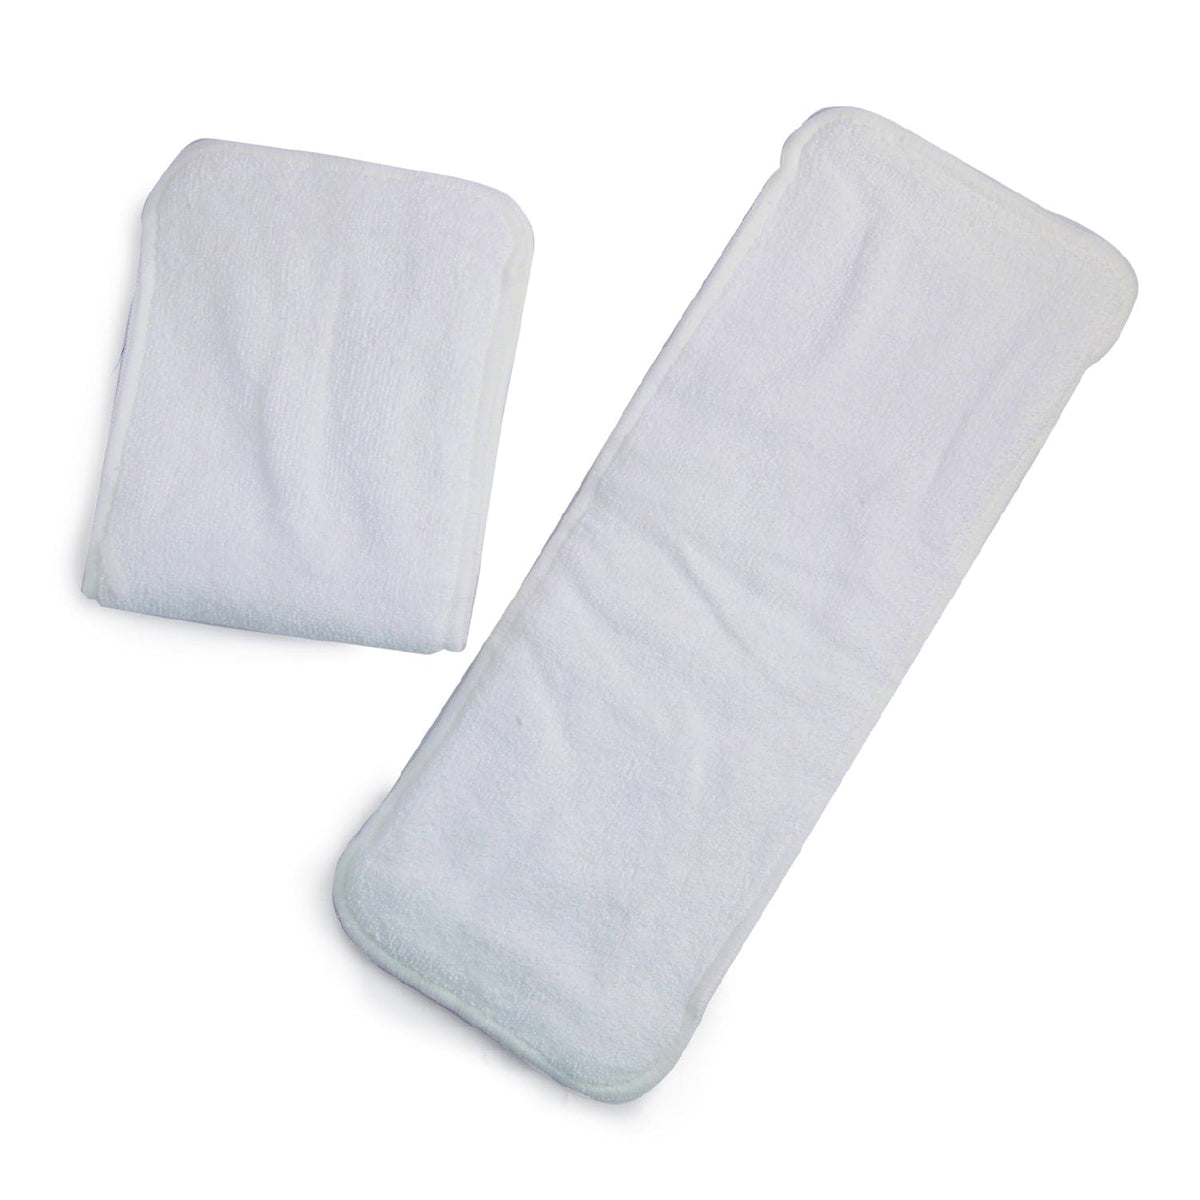 Double gusset nappy cover - Nappyneedz - one size fits most overnap